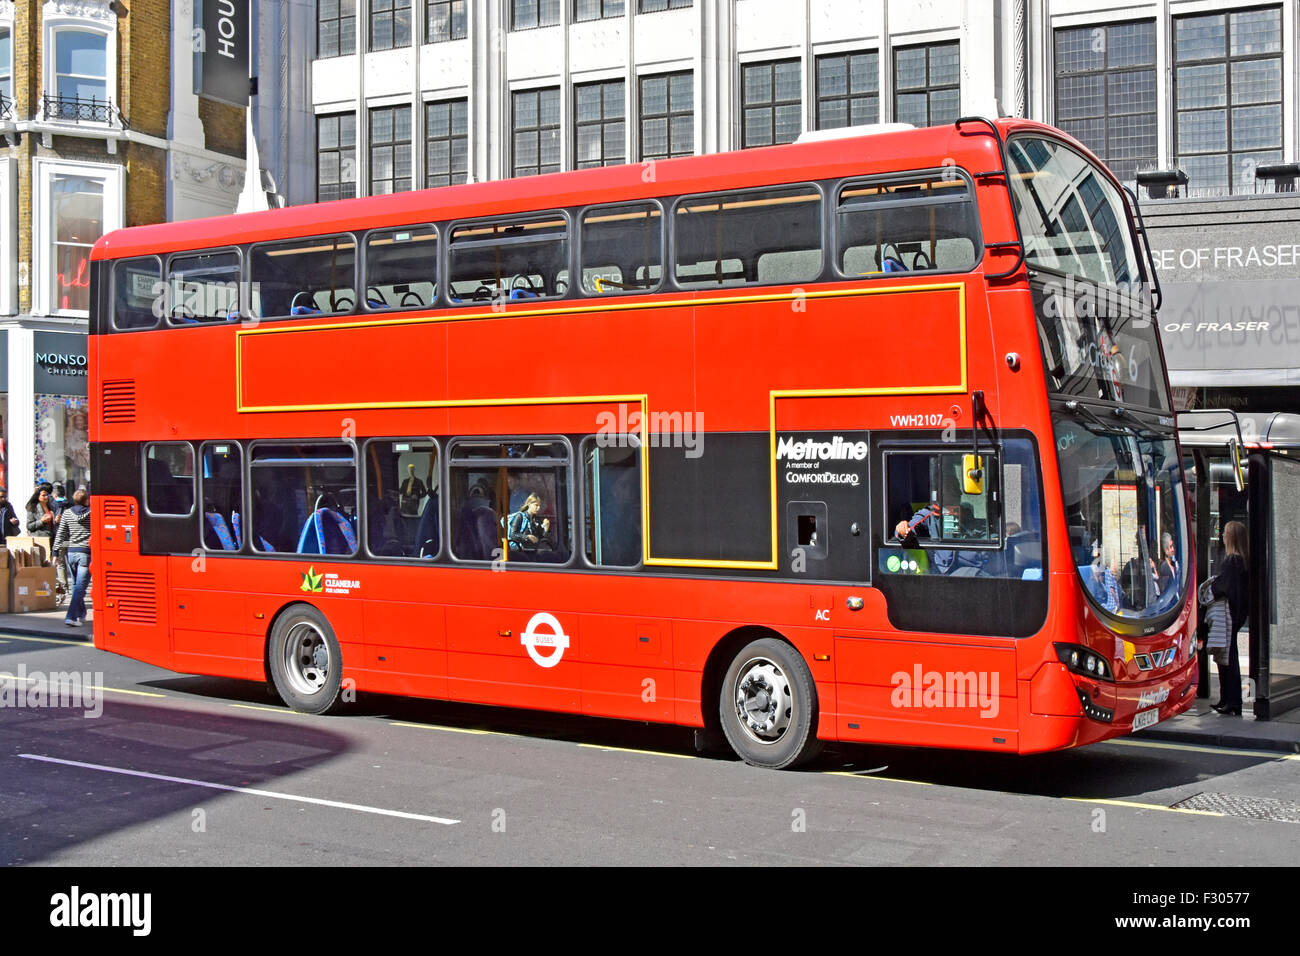 London bus red double decker public transport Hybrid Cleaner Air bus operated by Metroline no external advertising England UK Stock Photo